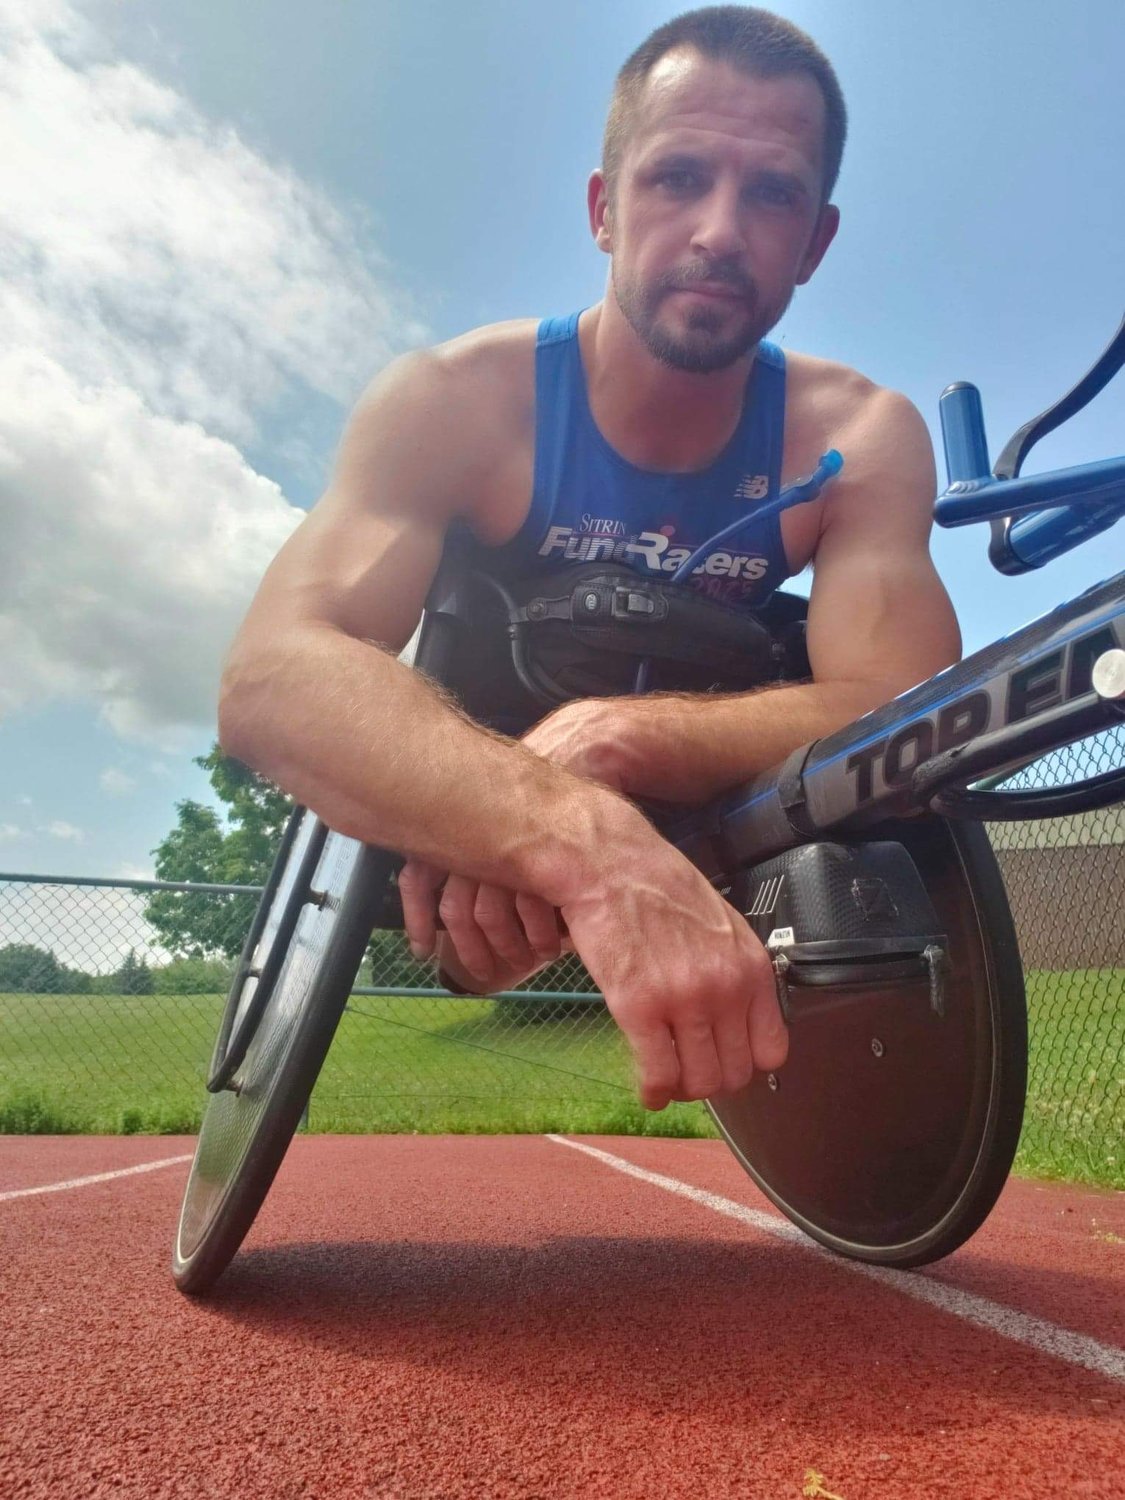 Utica’s Hermin Garic has had a string of strong results, including winning the Boilermaker Road Race wheelchair division last fall. He’s among a few locals in the field.